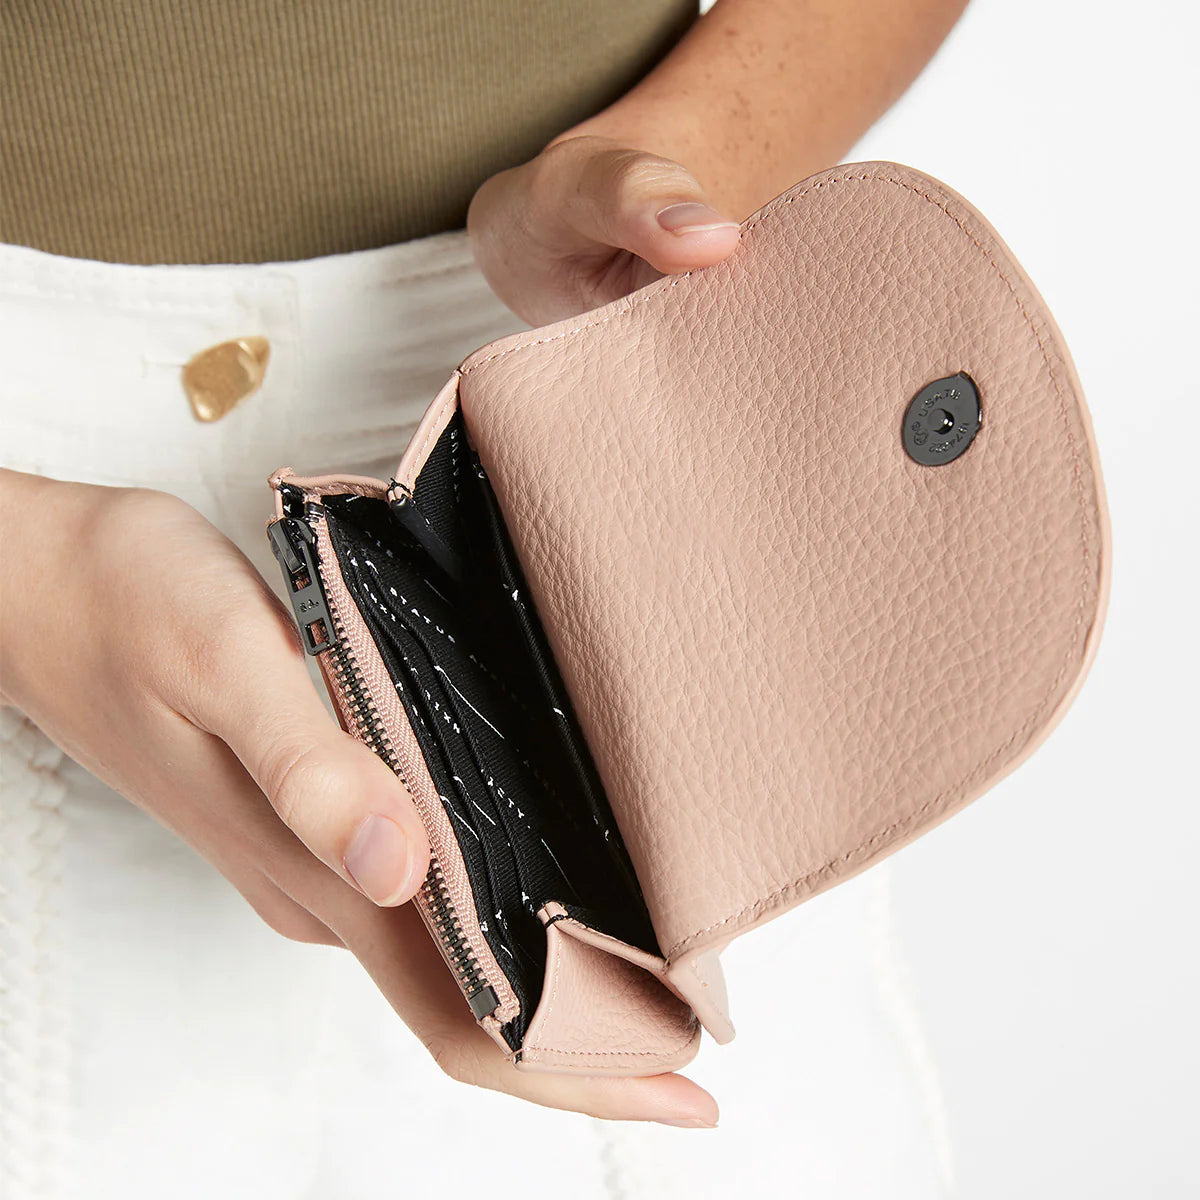 Us For Now Wallet - Dusky Pink